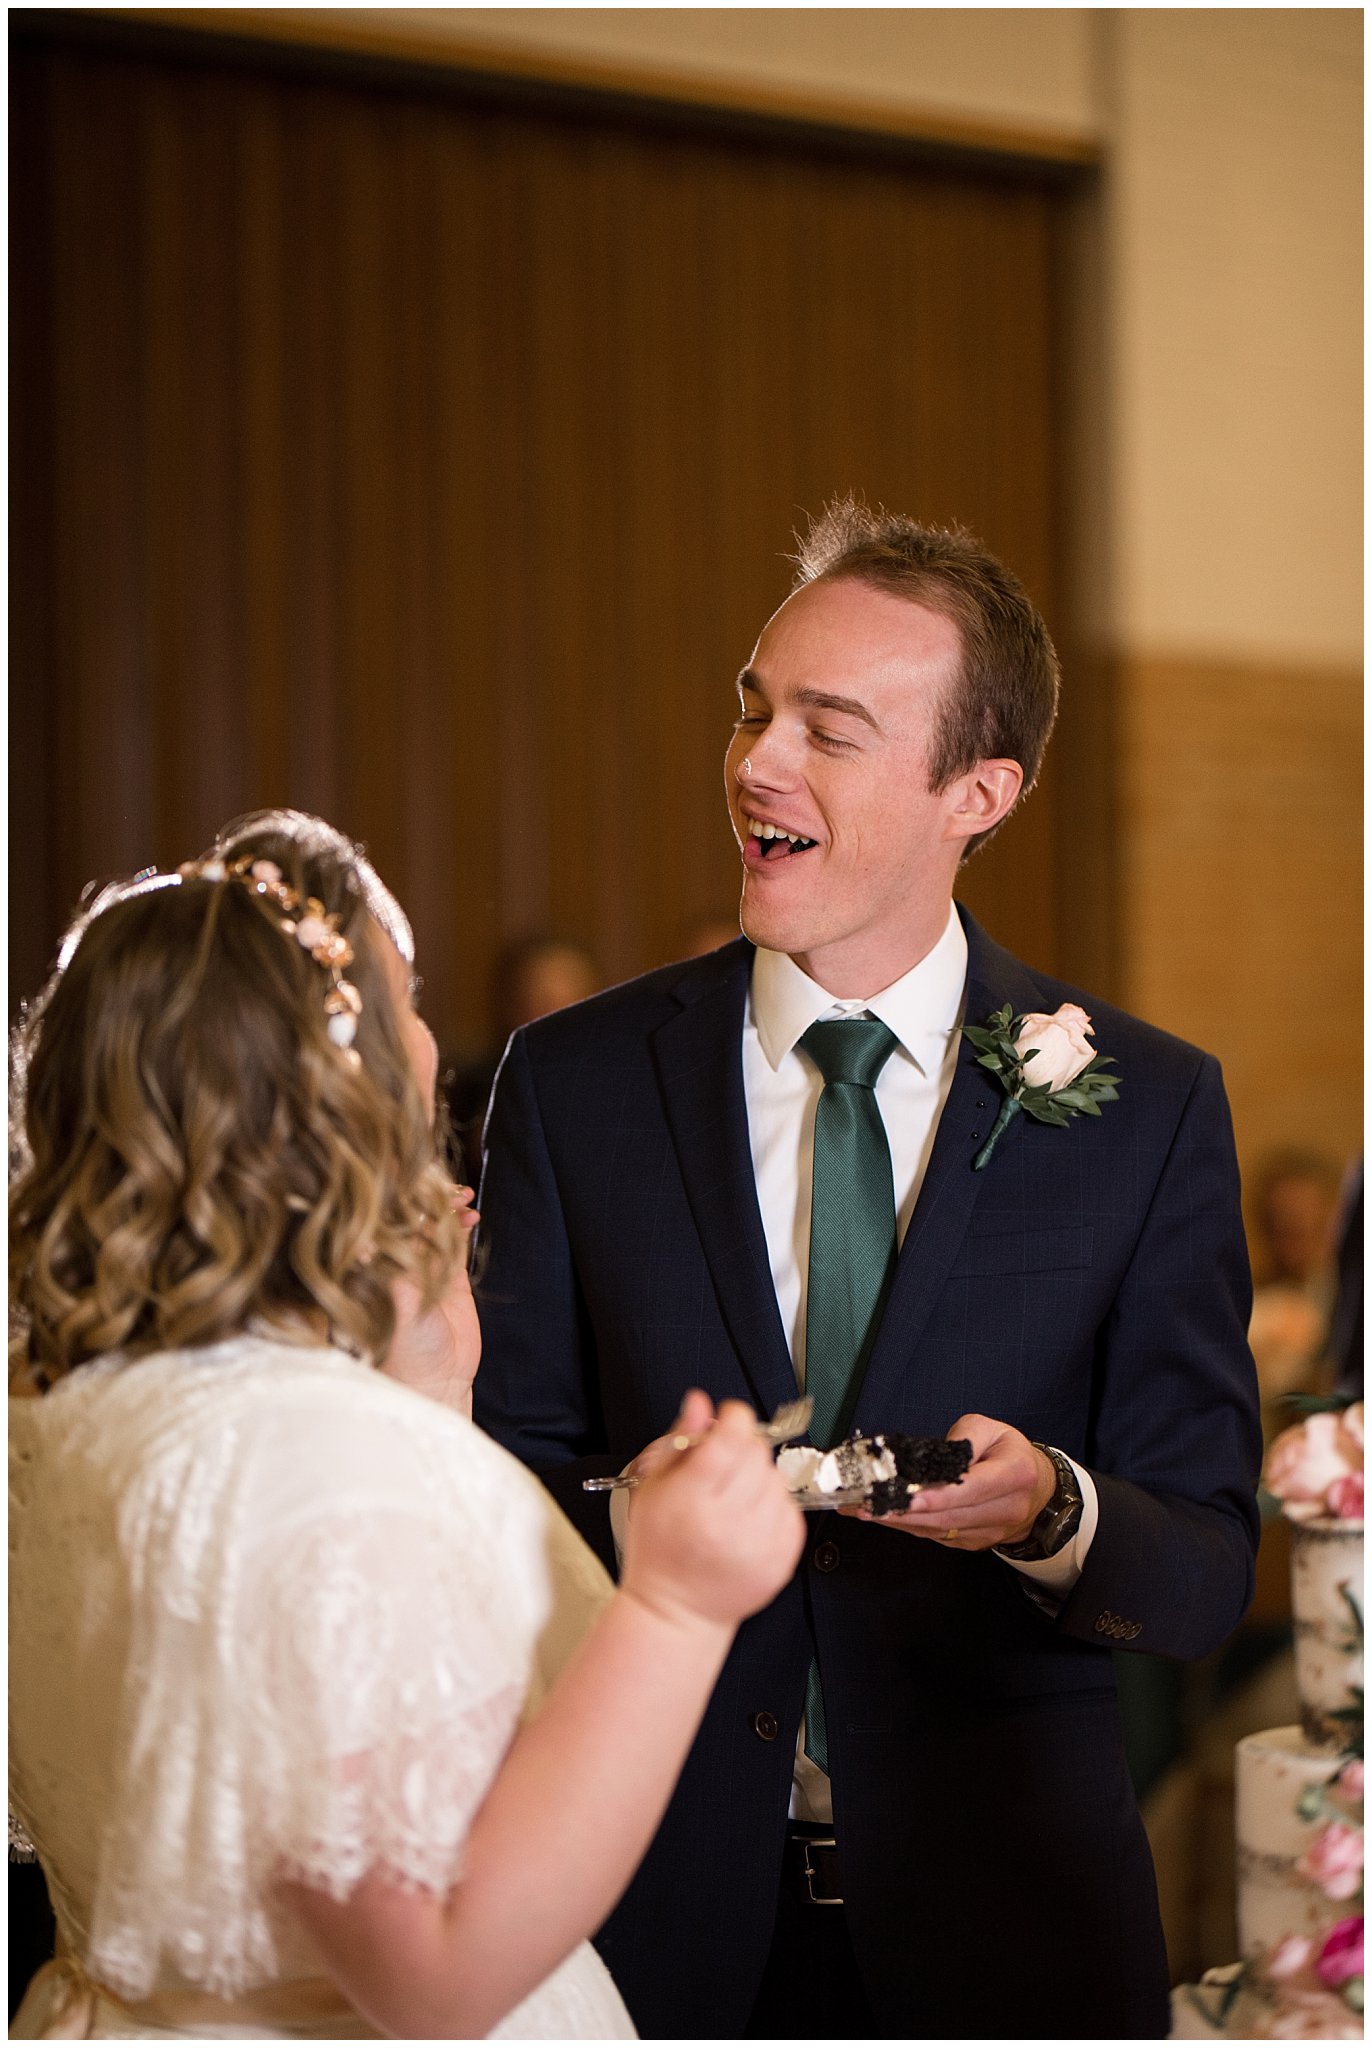 Bride puts cake on groom's nose | Ogden Temple Winter Wedding | Emerald Green and Pink Wedding | Jessie and Dallin Photography